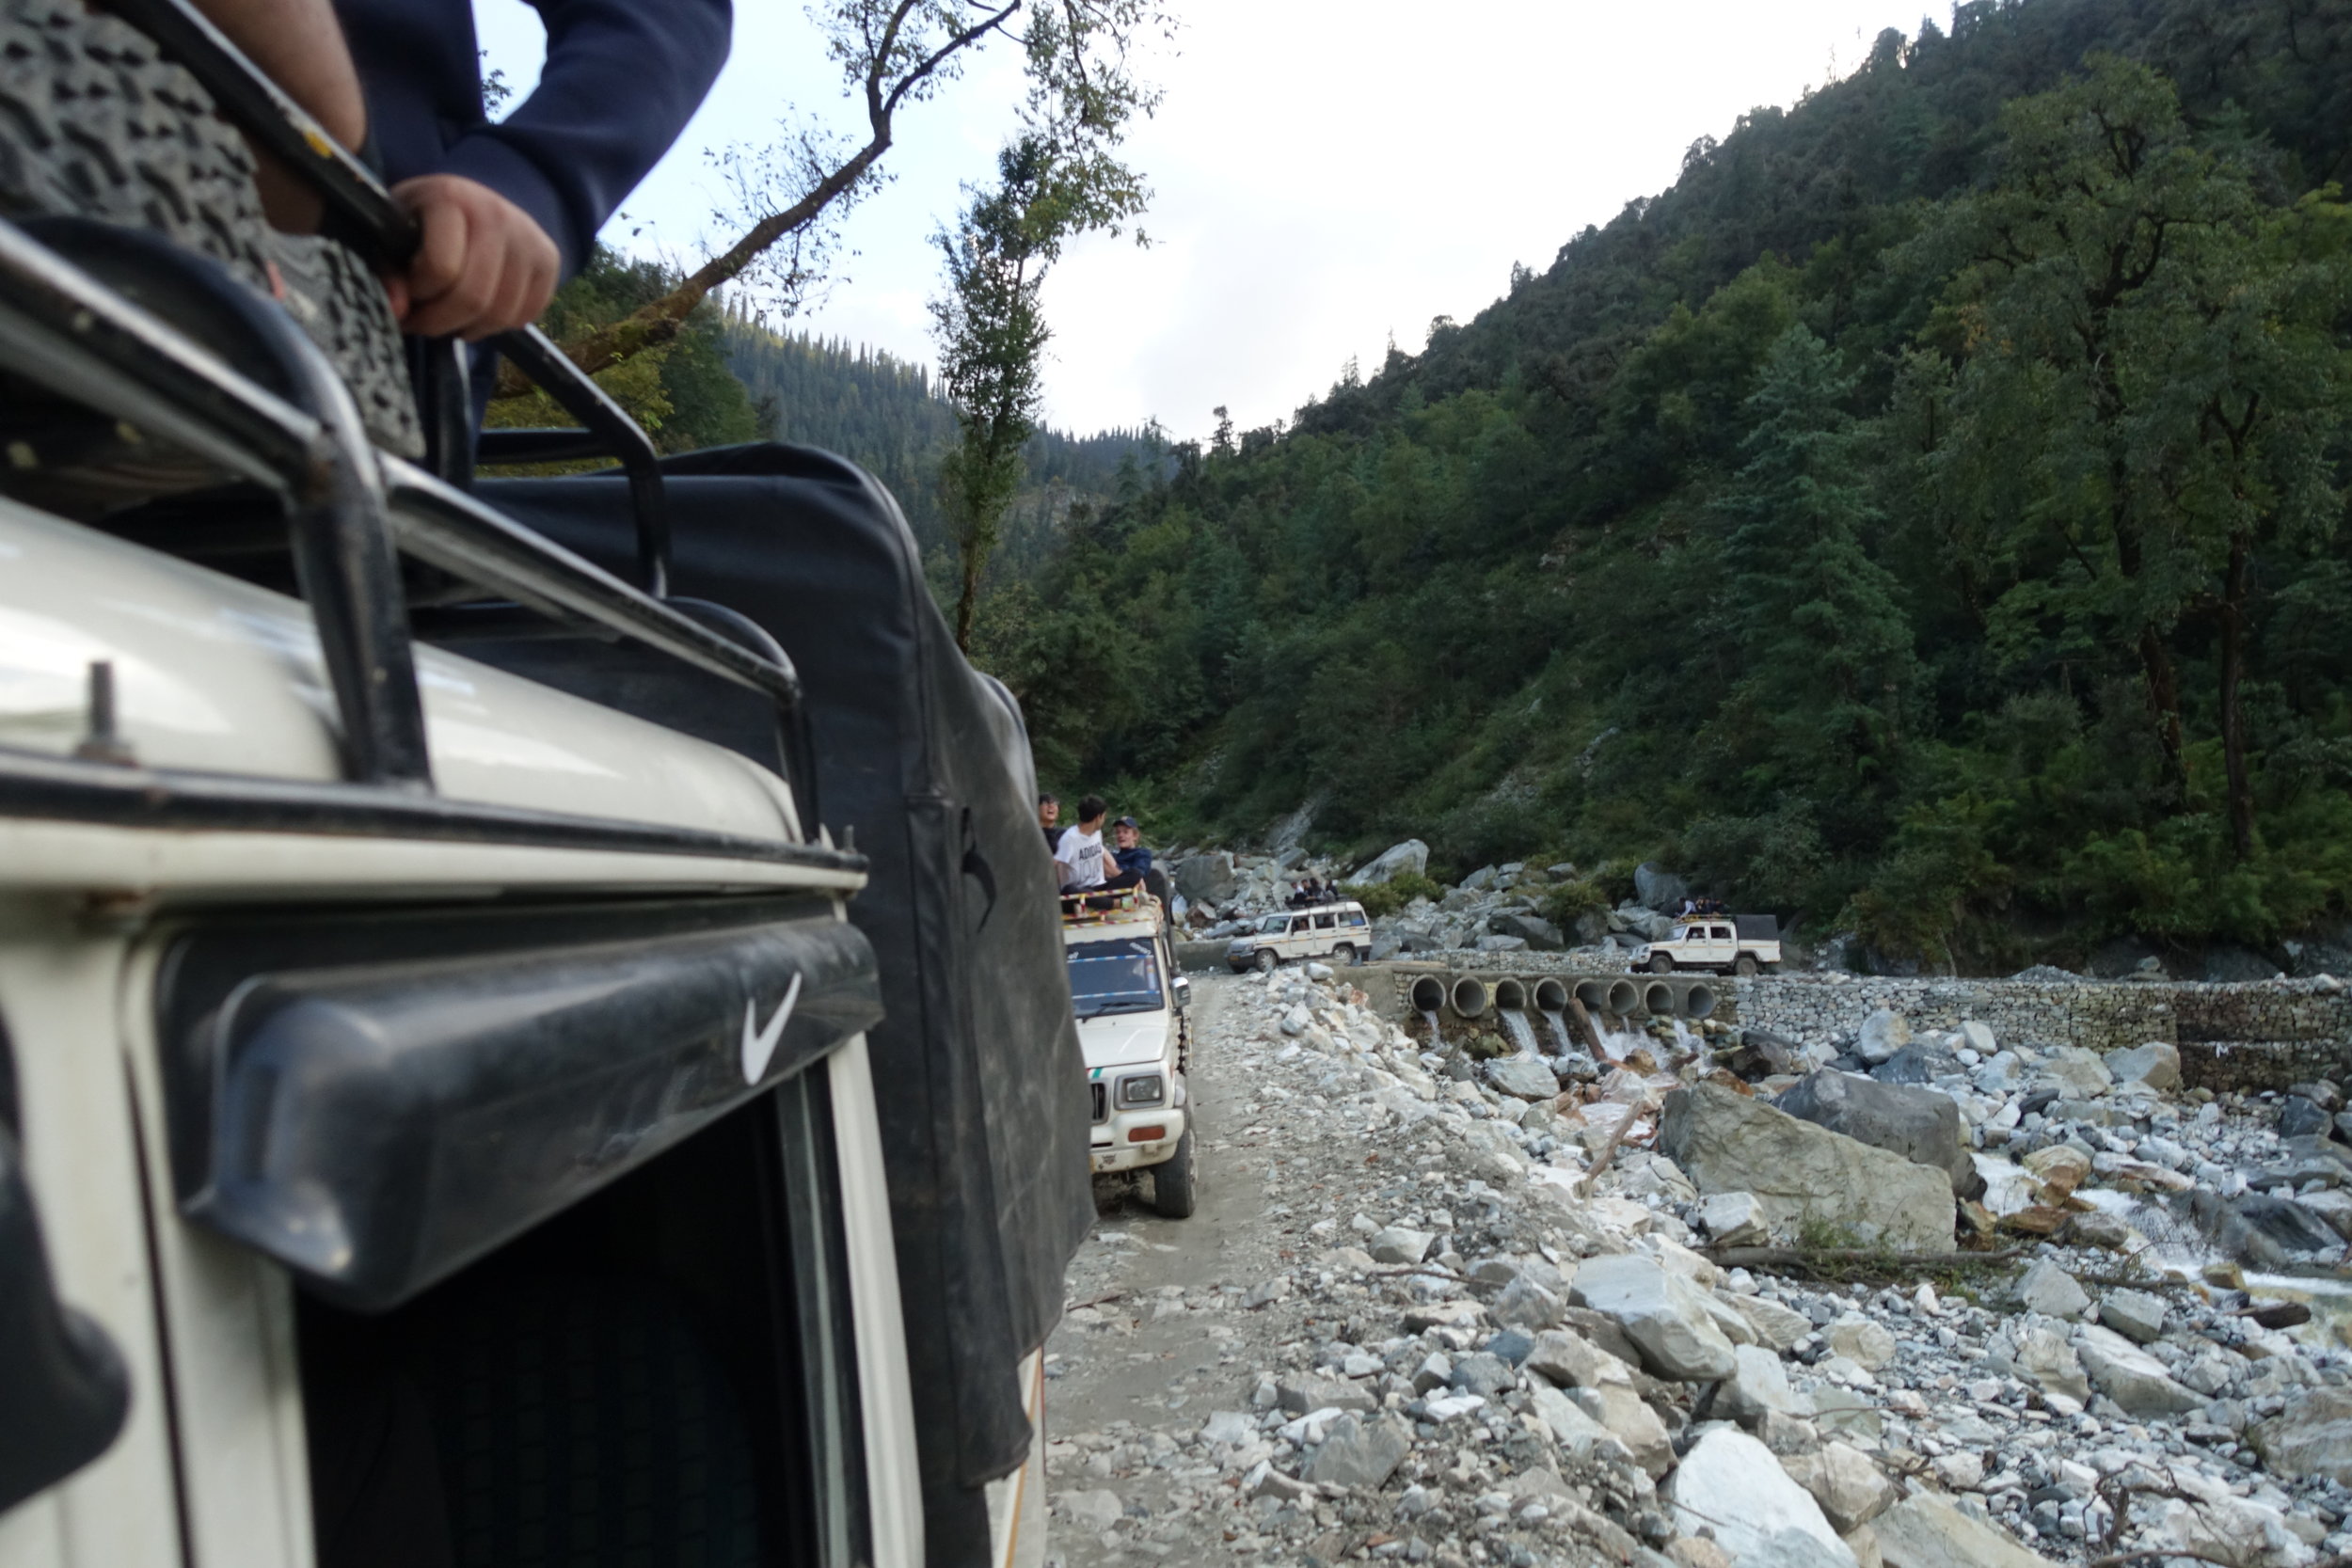  To get to our trailhead, we had to ditch our vans for jeeps and then ditch those jeeps for other jeeps where a landslide had wrecked the road. 